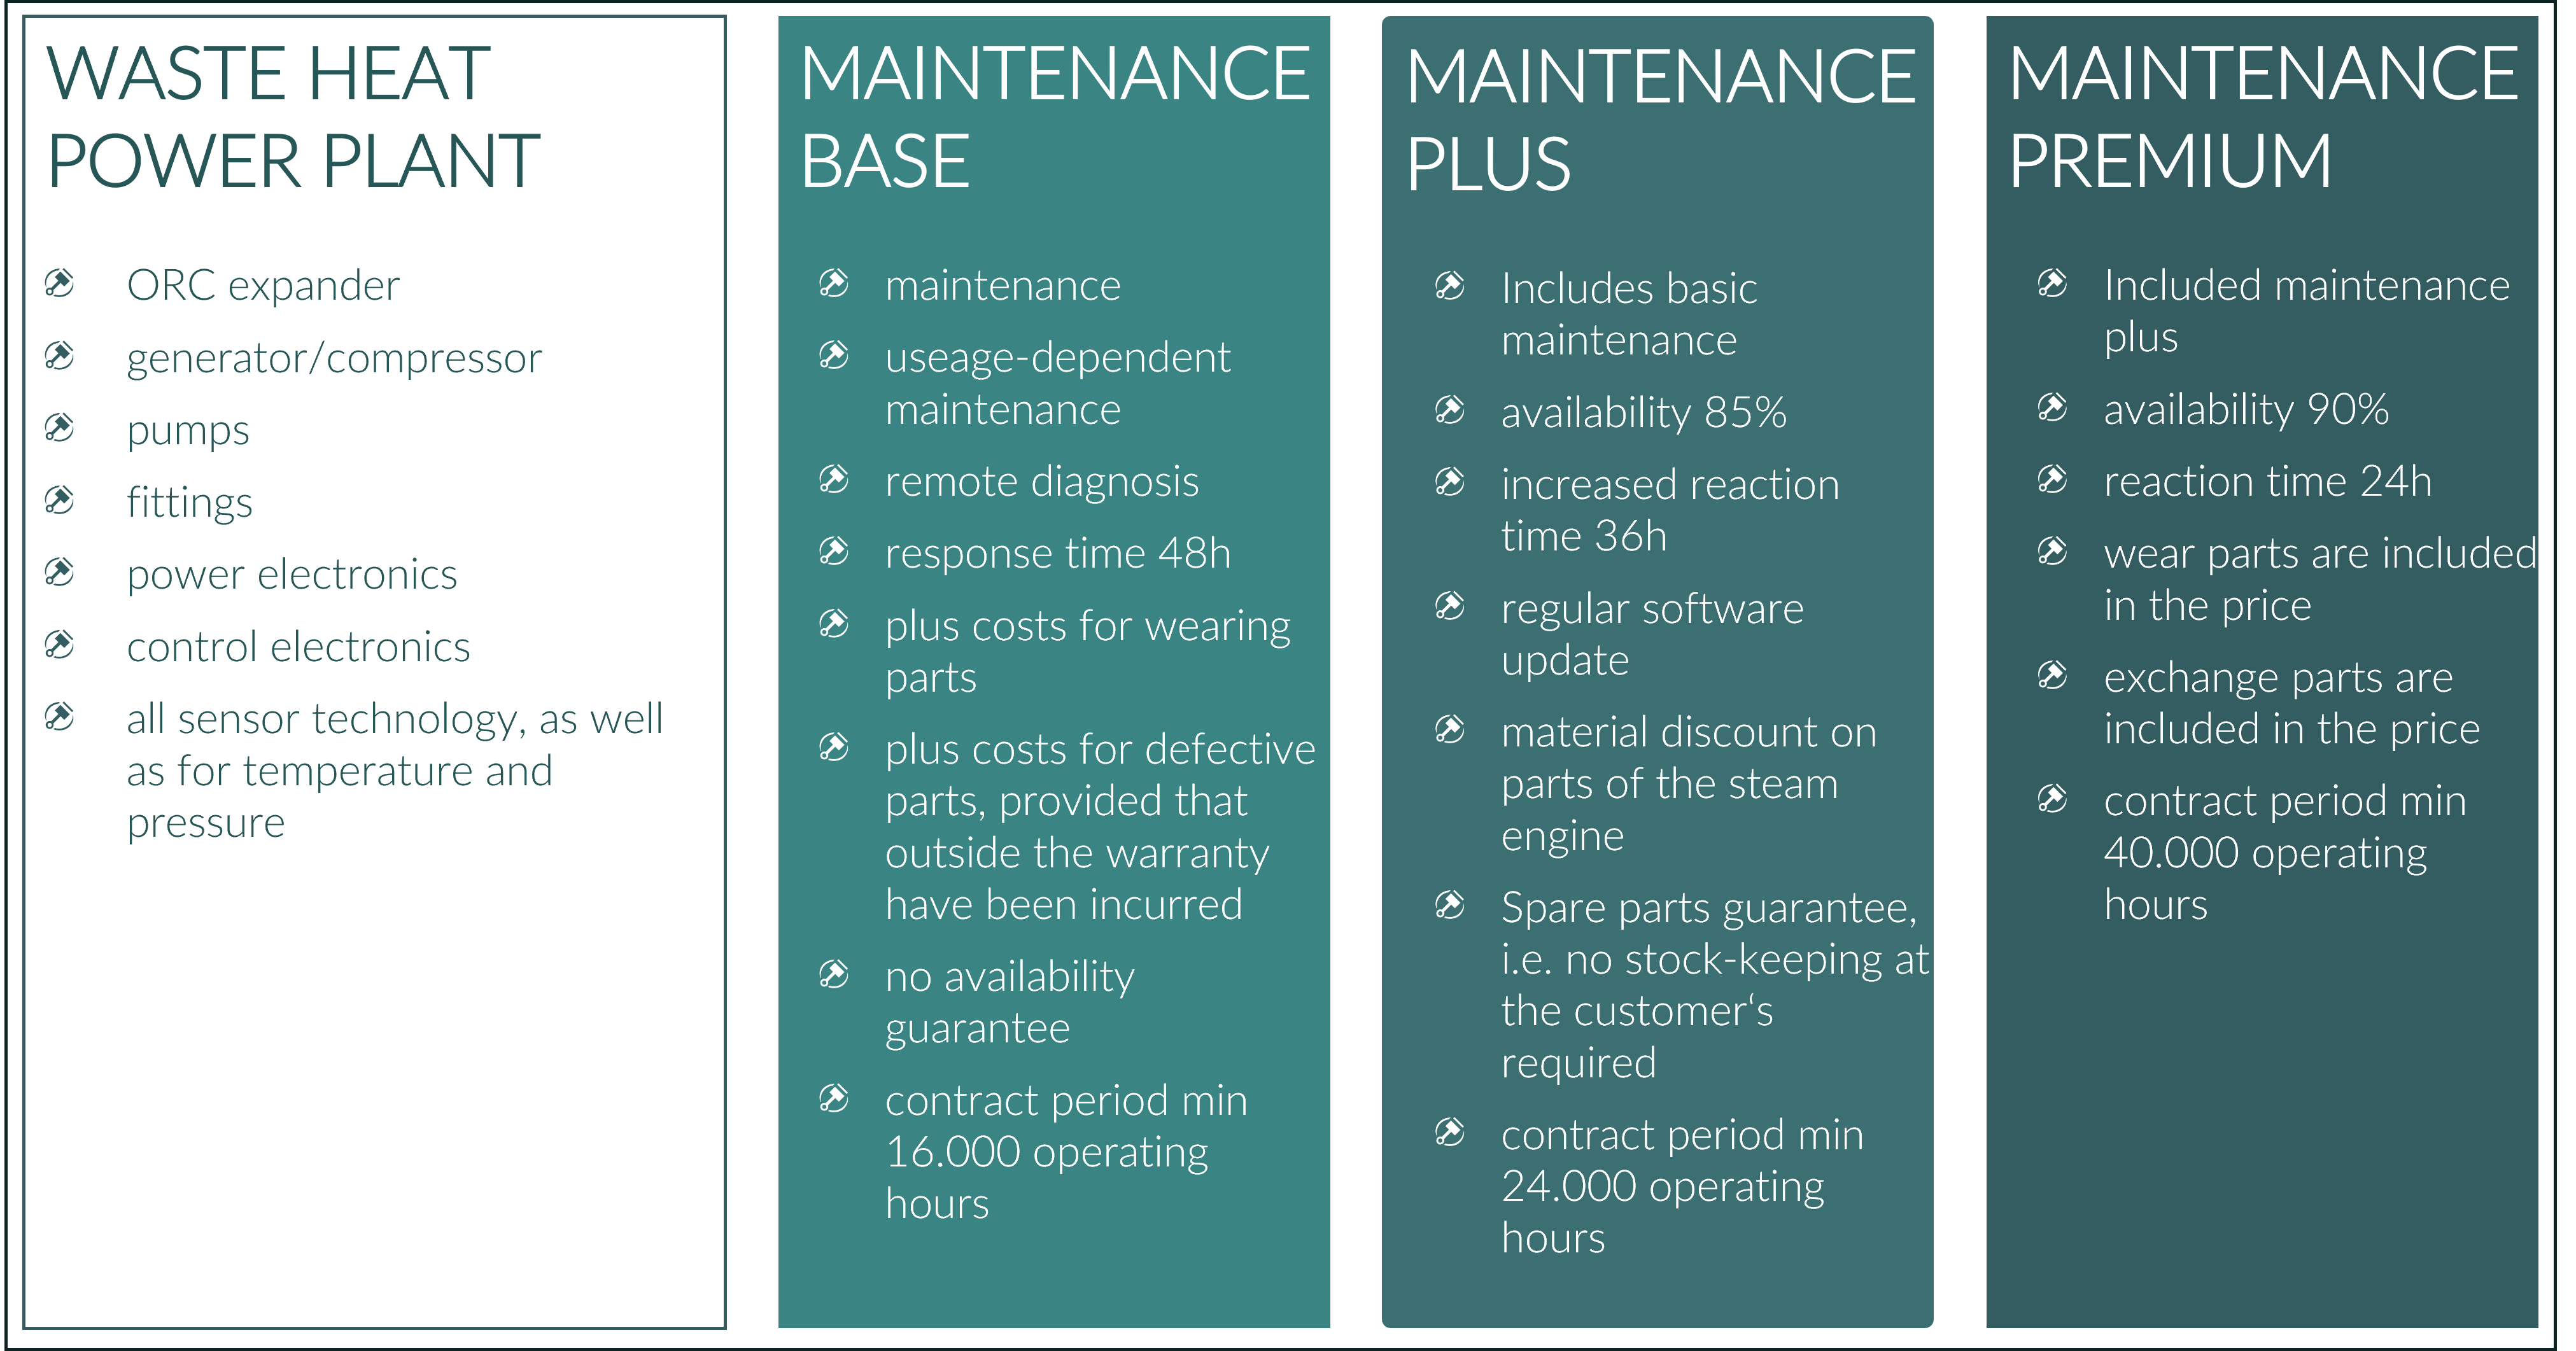 Overview of DeVeTec maintenance and service packages around the waste heat power plant